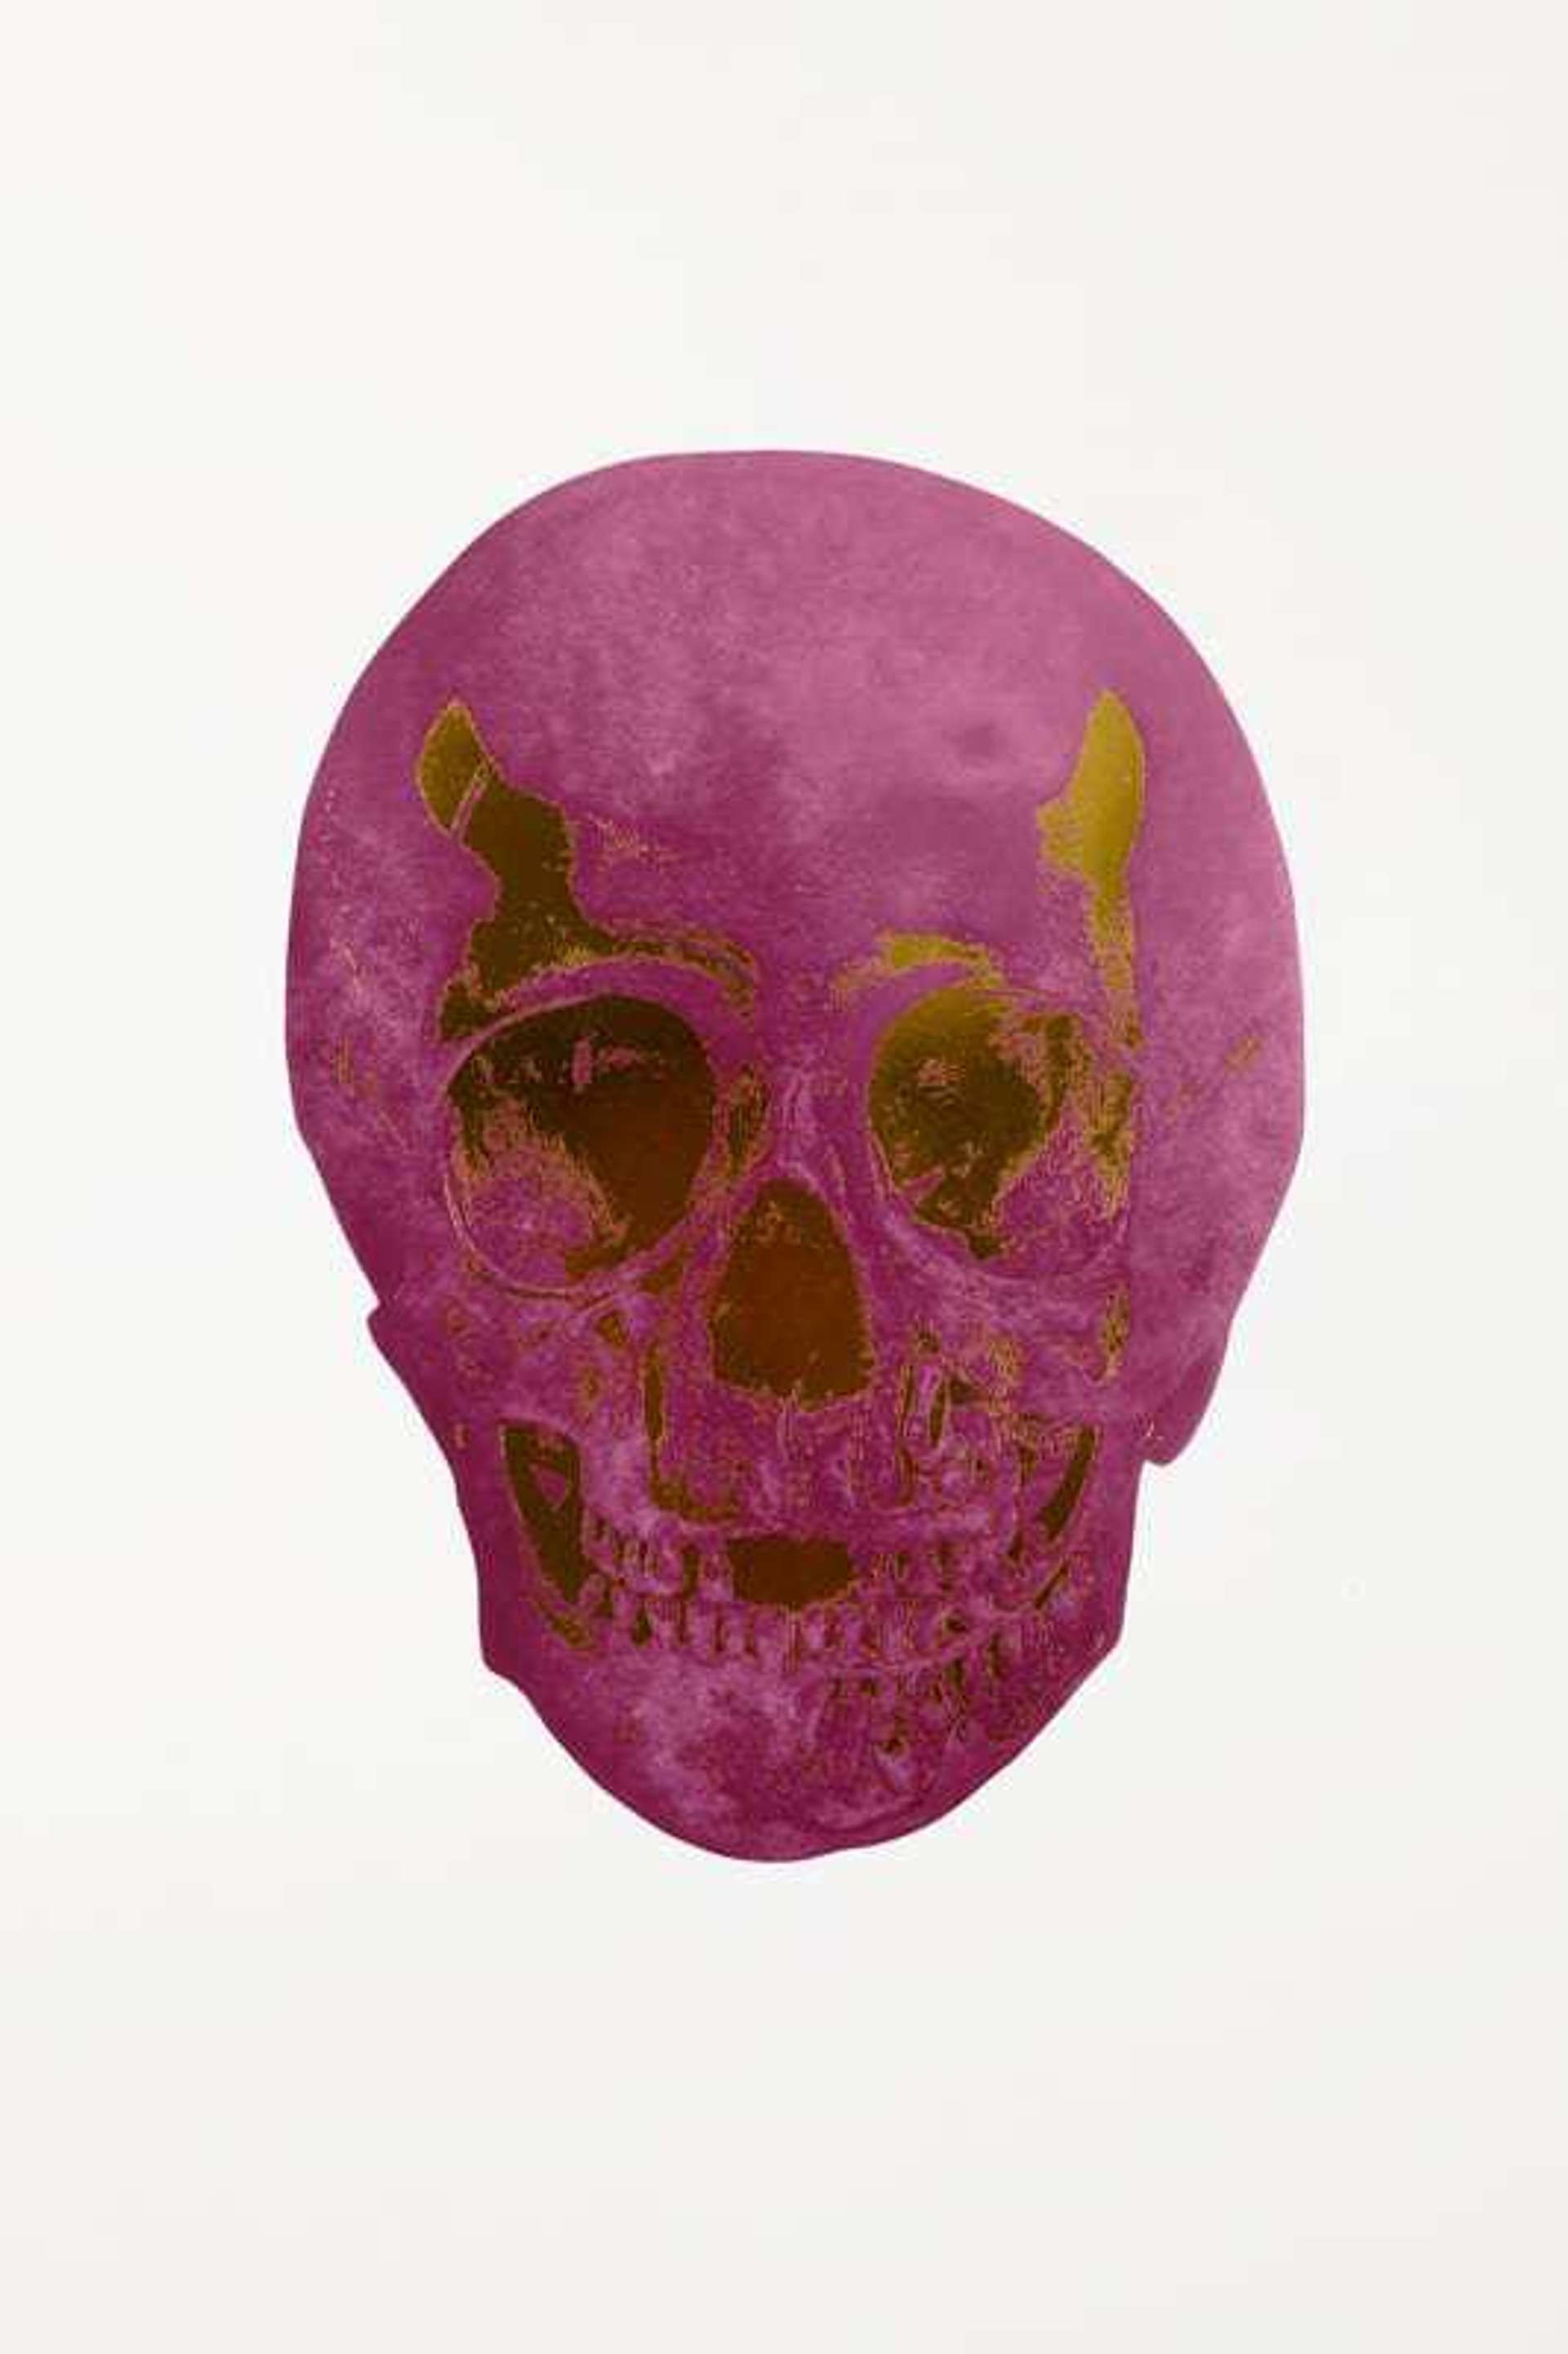 The Dead (loganberry pink, oriental gold) - Signed Print by Damien Hirst 2014 - MyArtBroker